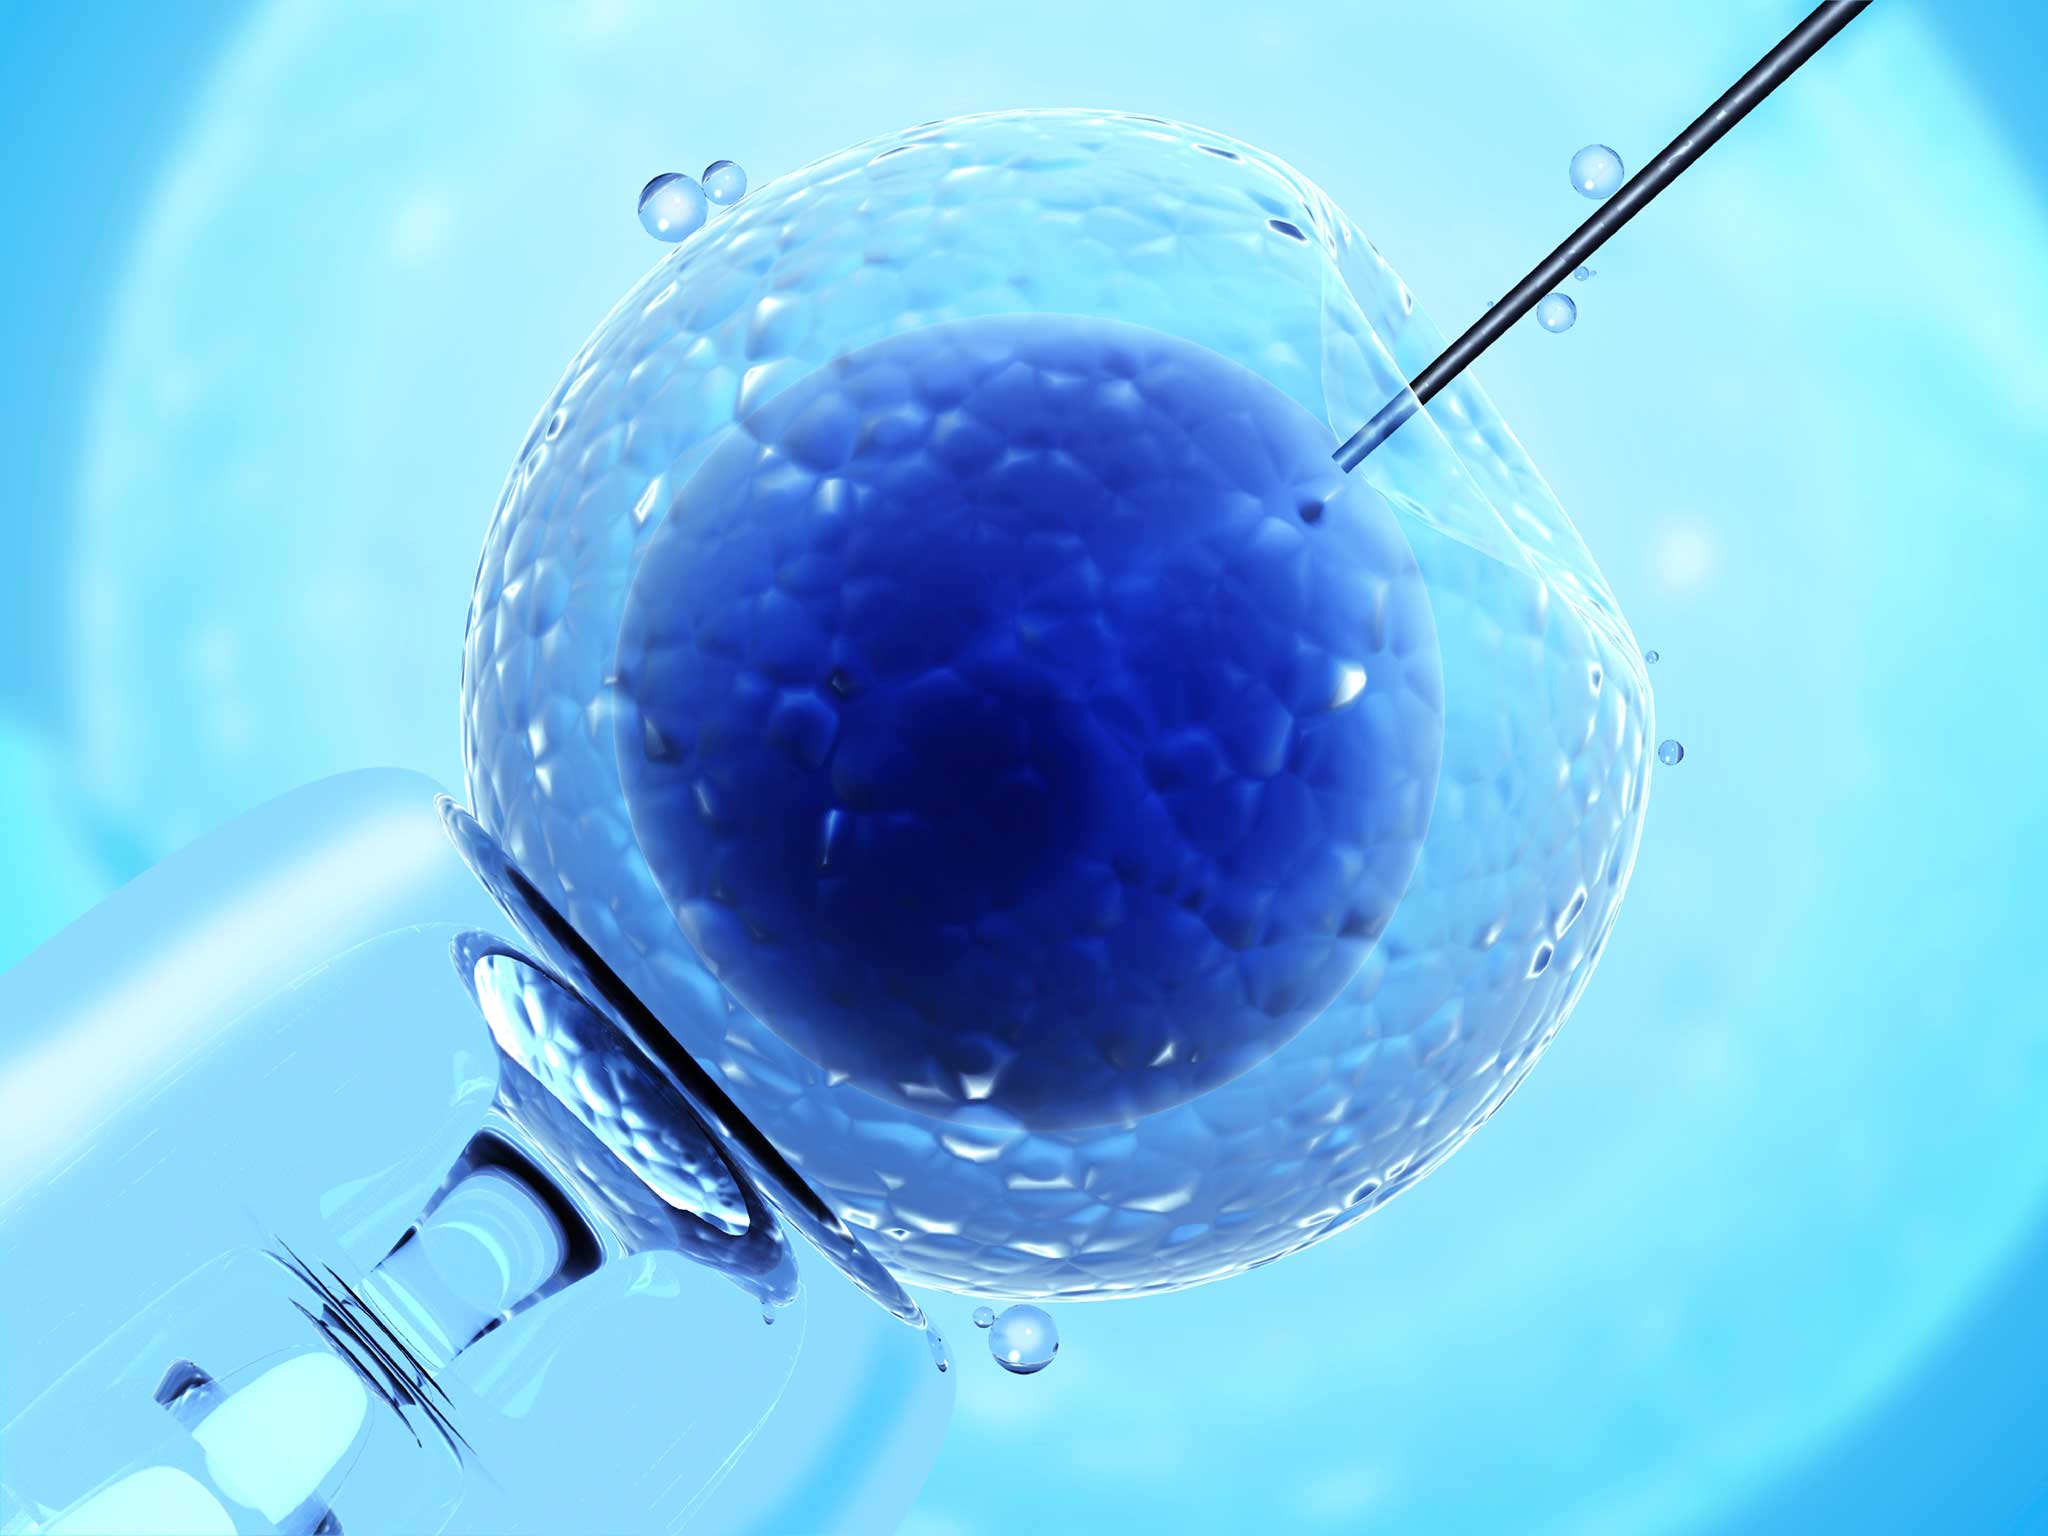 The results in parts of England contrasted to those in Scotland, Wales and Ireland, where IVF access is nationally standardised